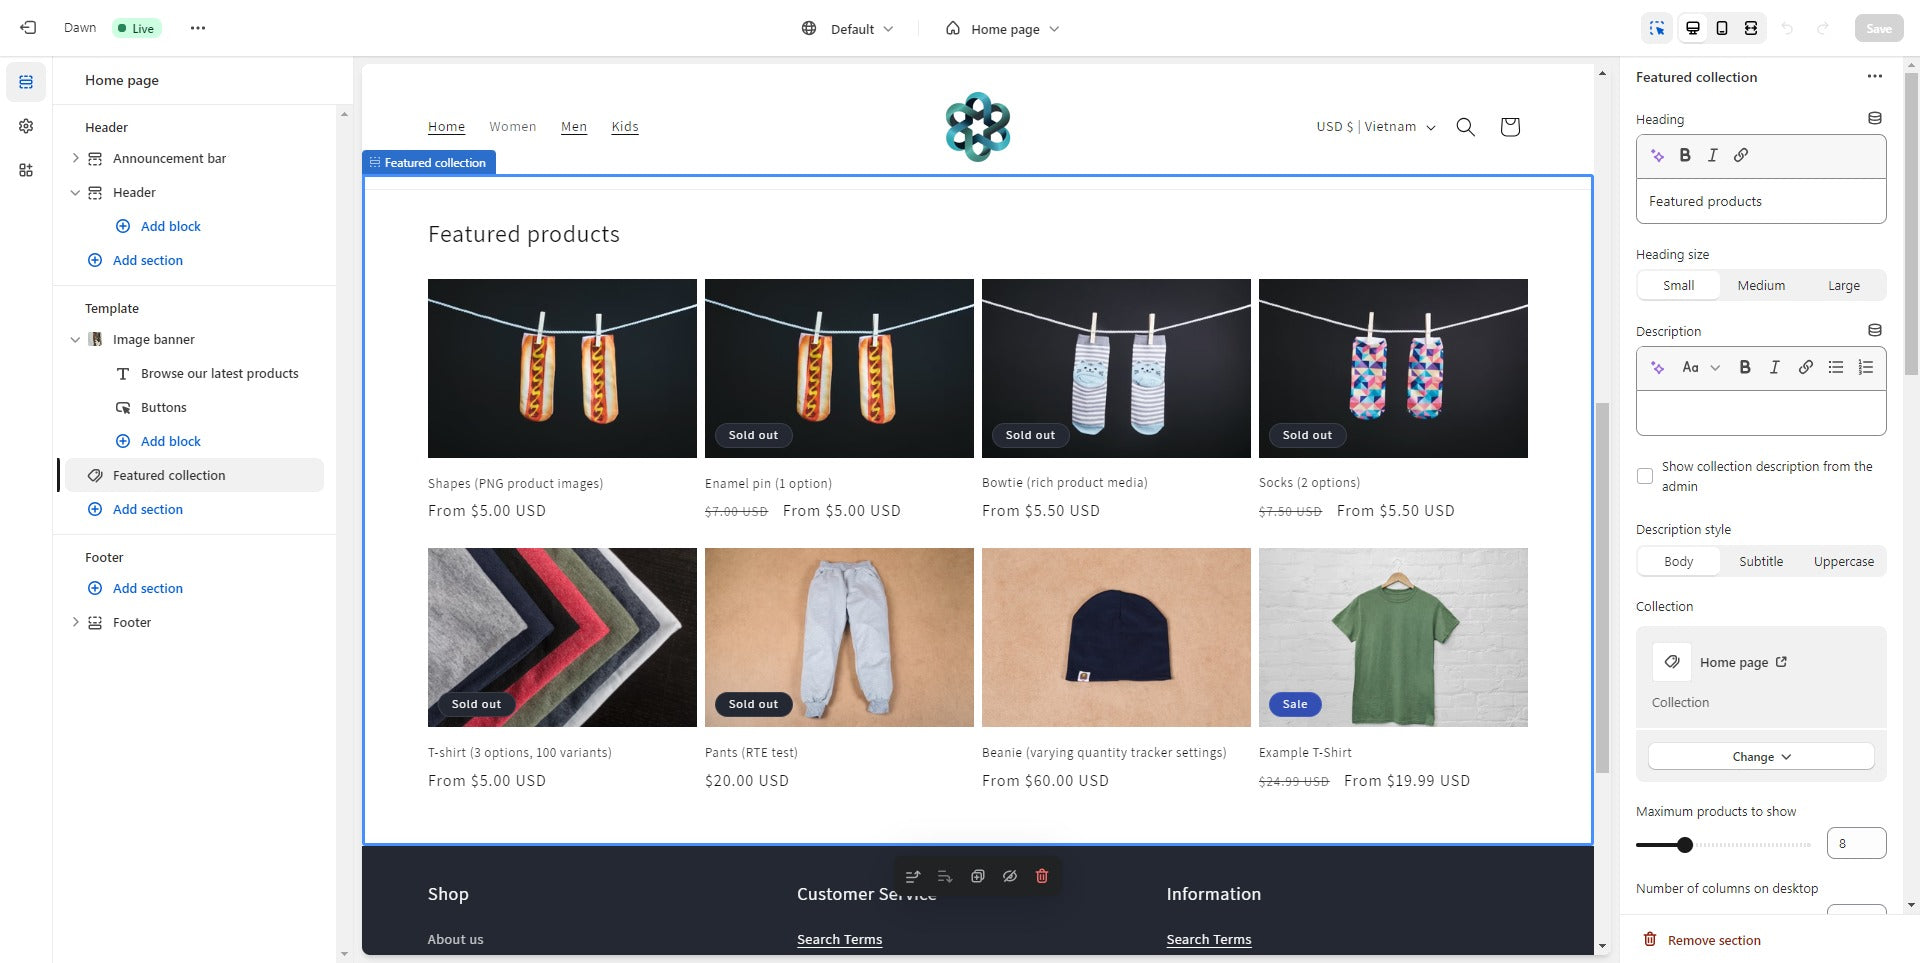 The Next Generation of Shopify Themes: Dawn Theme Review - 8